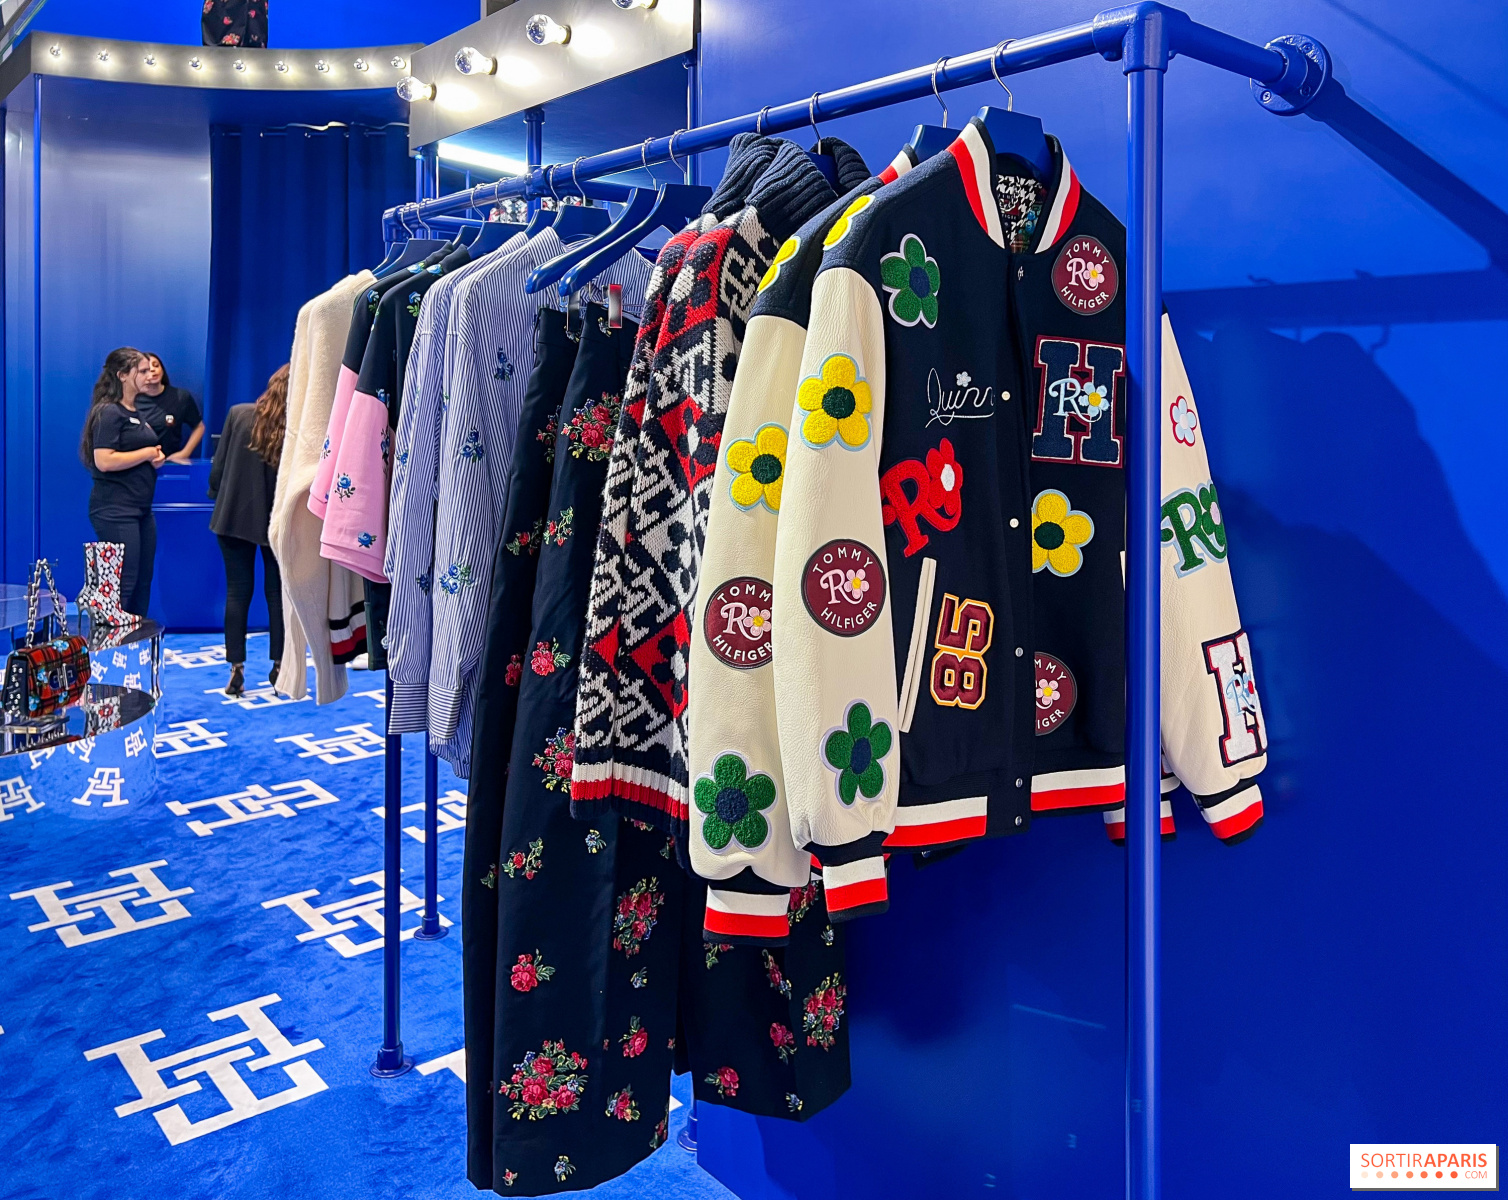 Tommy Hilfiger reopens a digitally enhanced Paris flagship